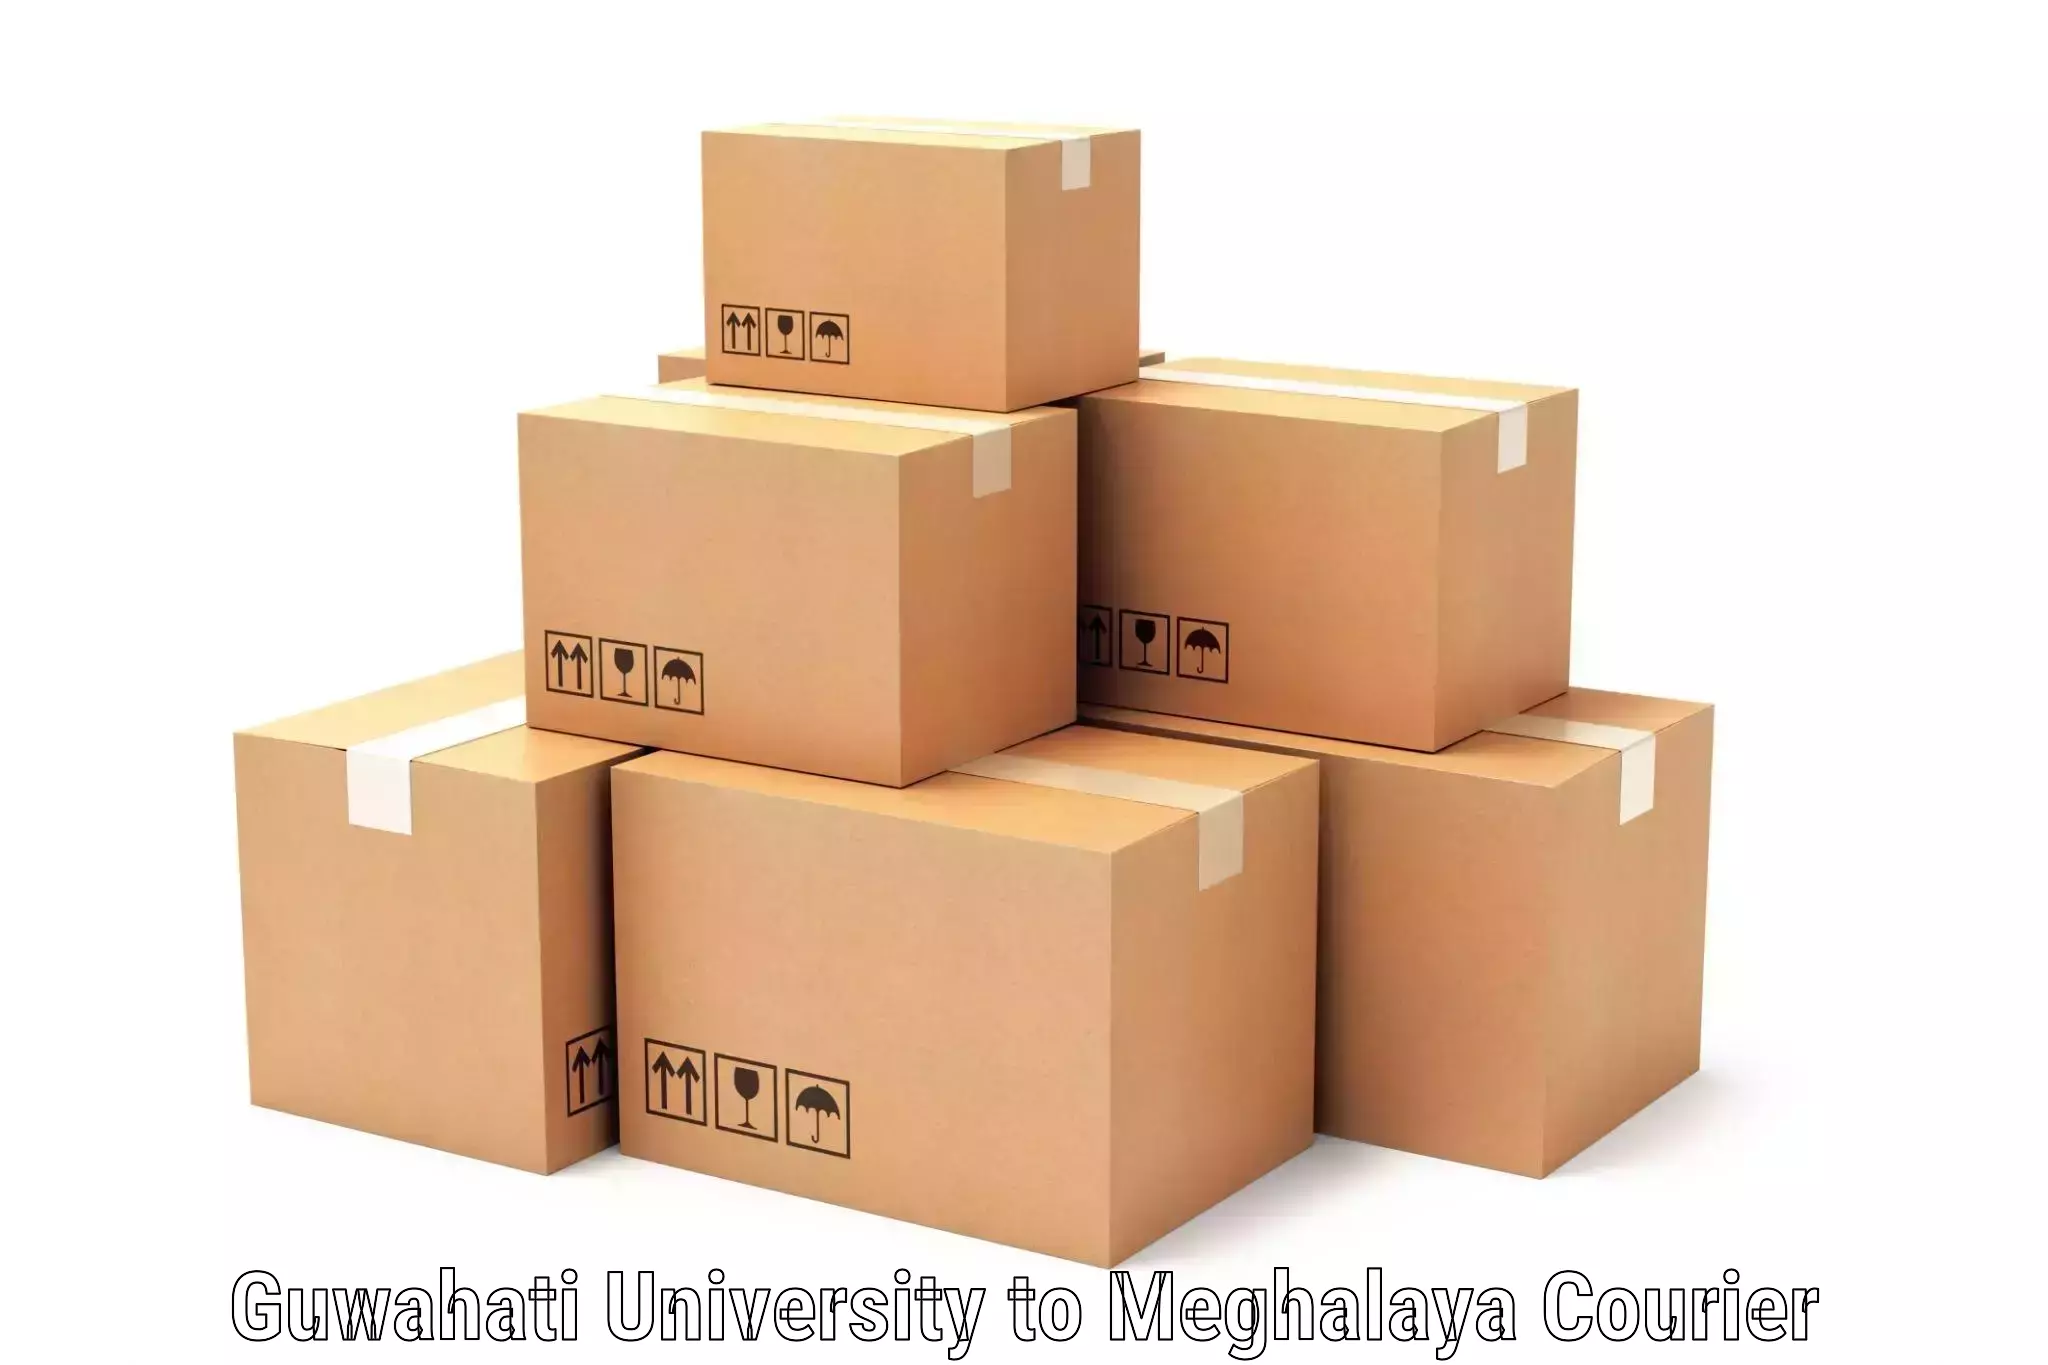 Small parcel delivery Guwahati University to South Garo Hills